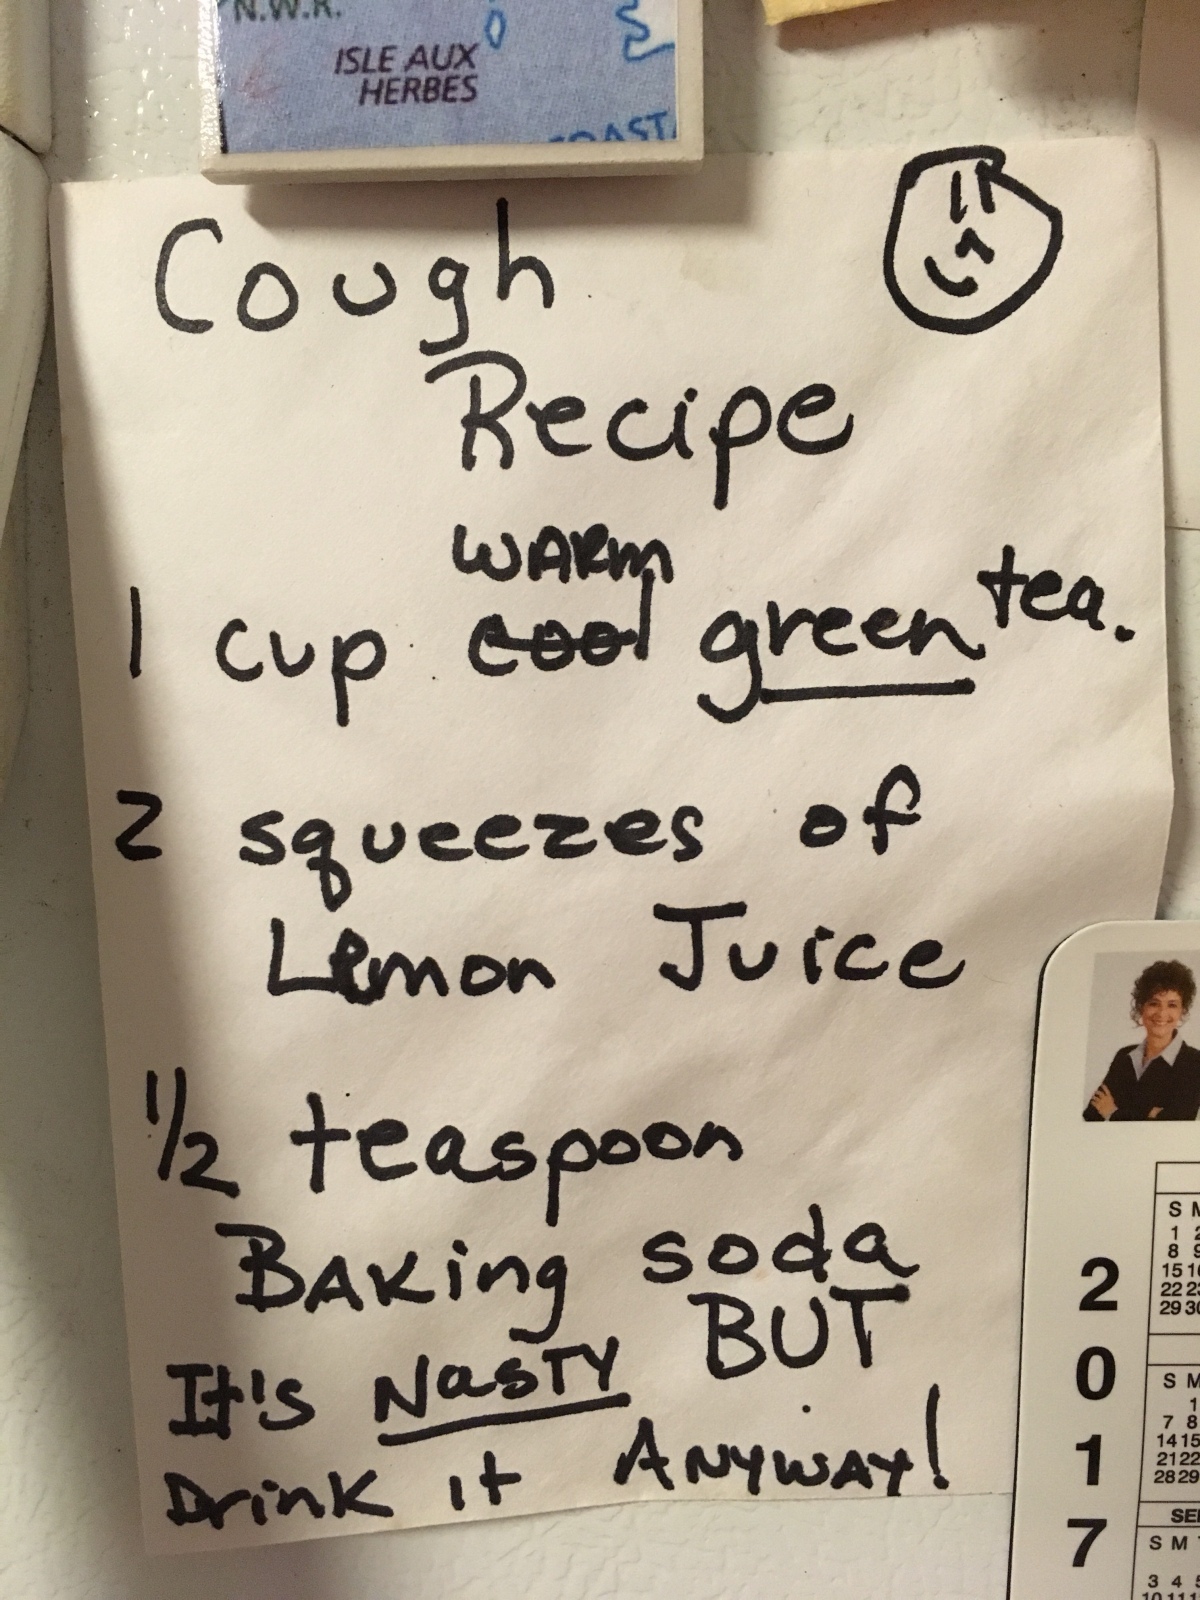 Cough and Cold Relief Recipe